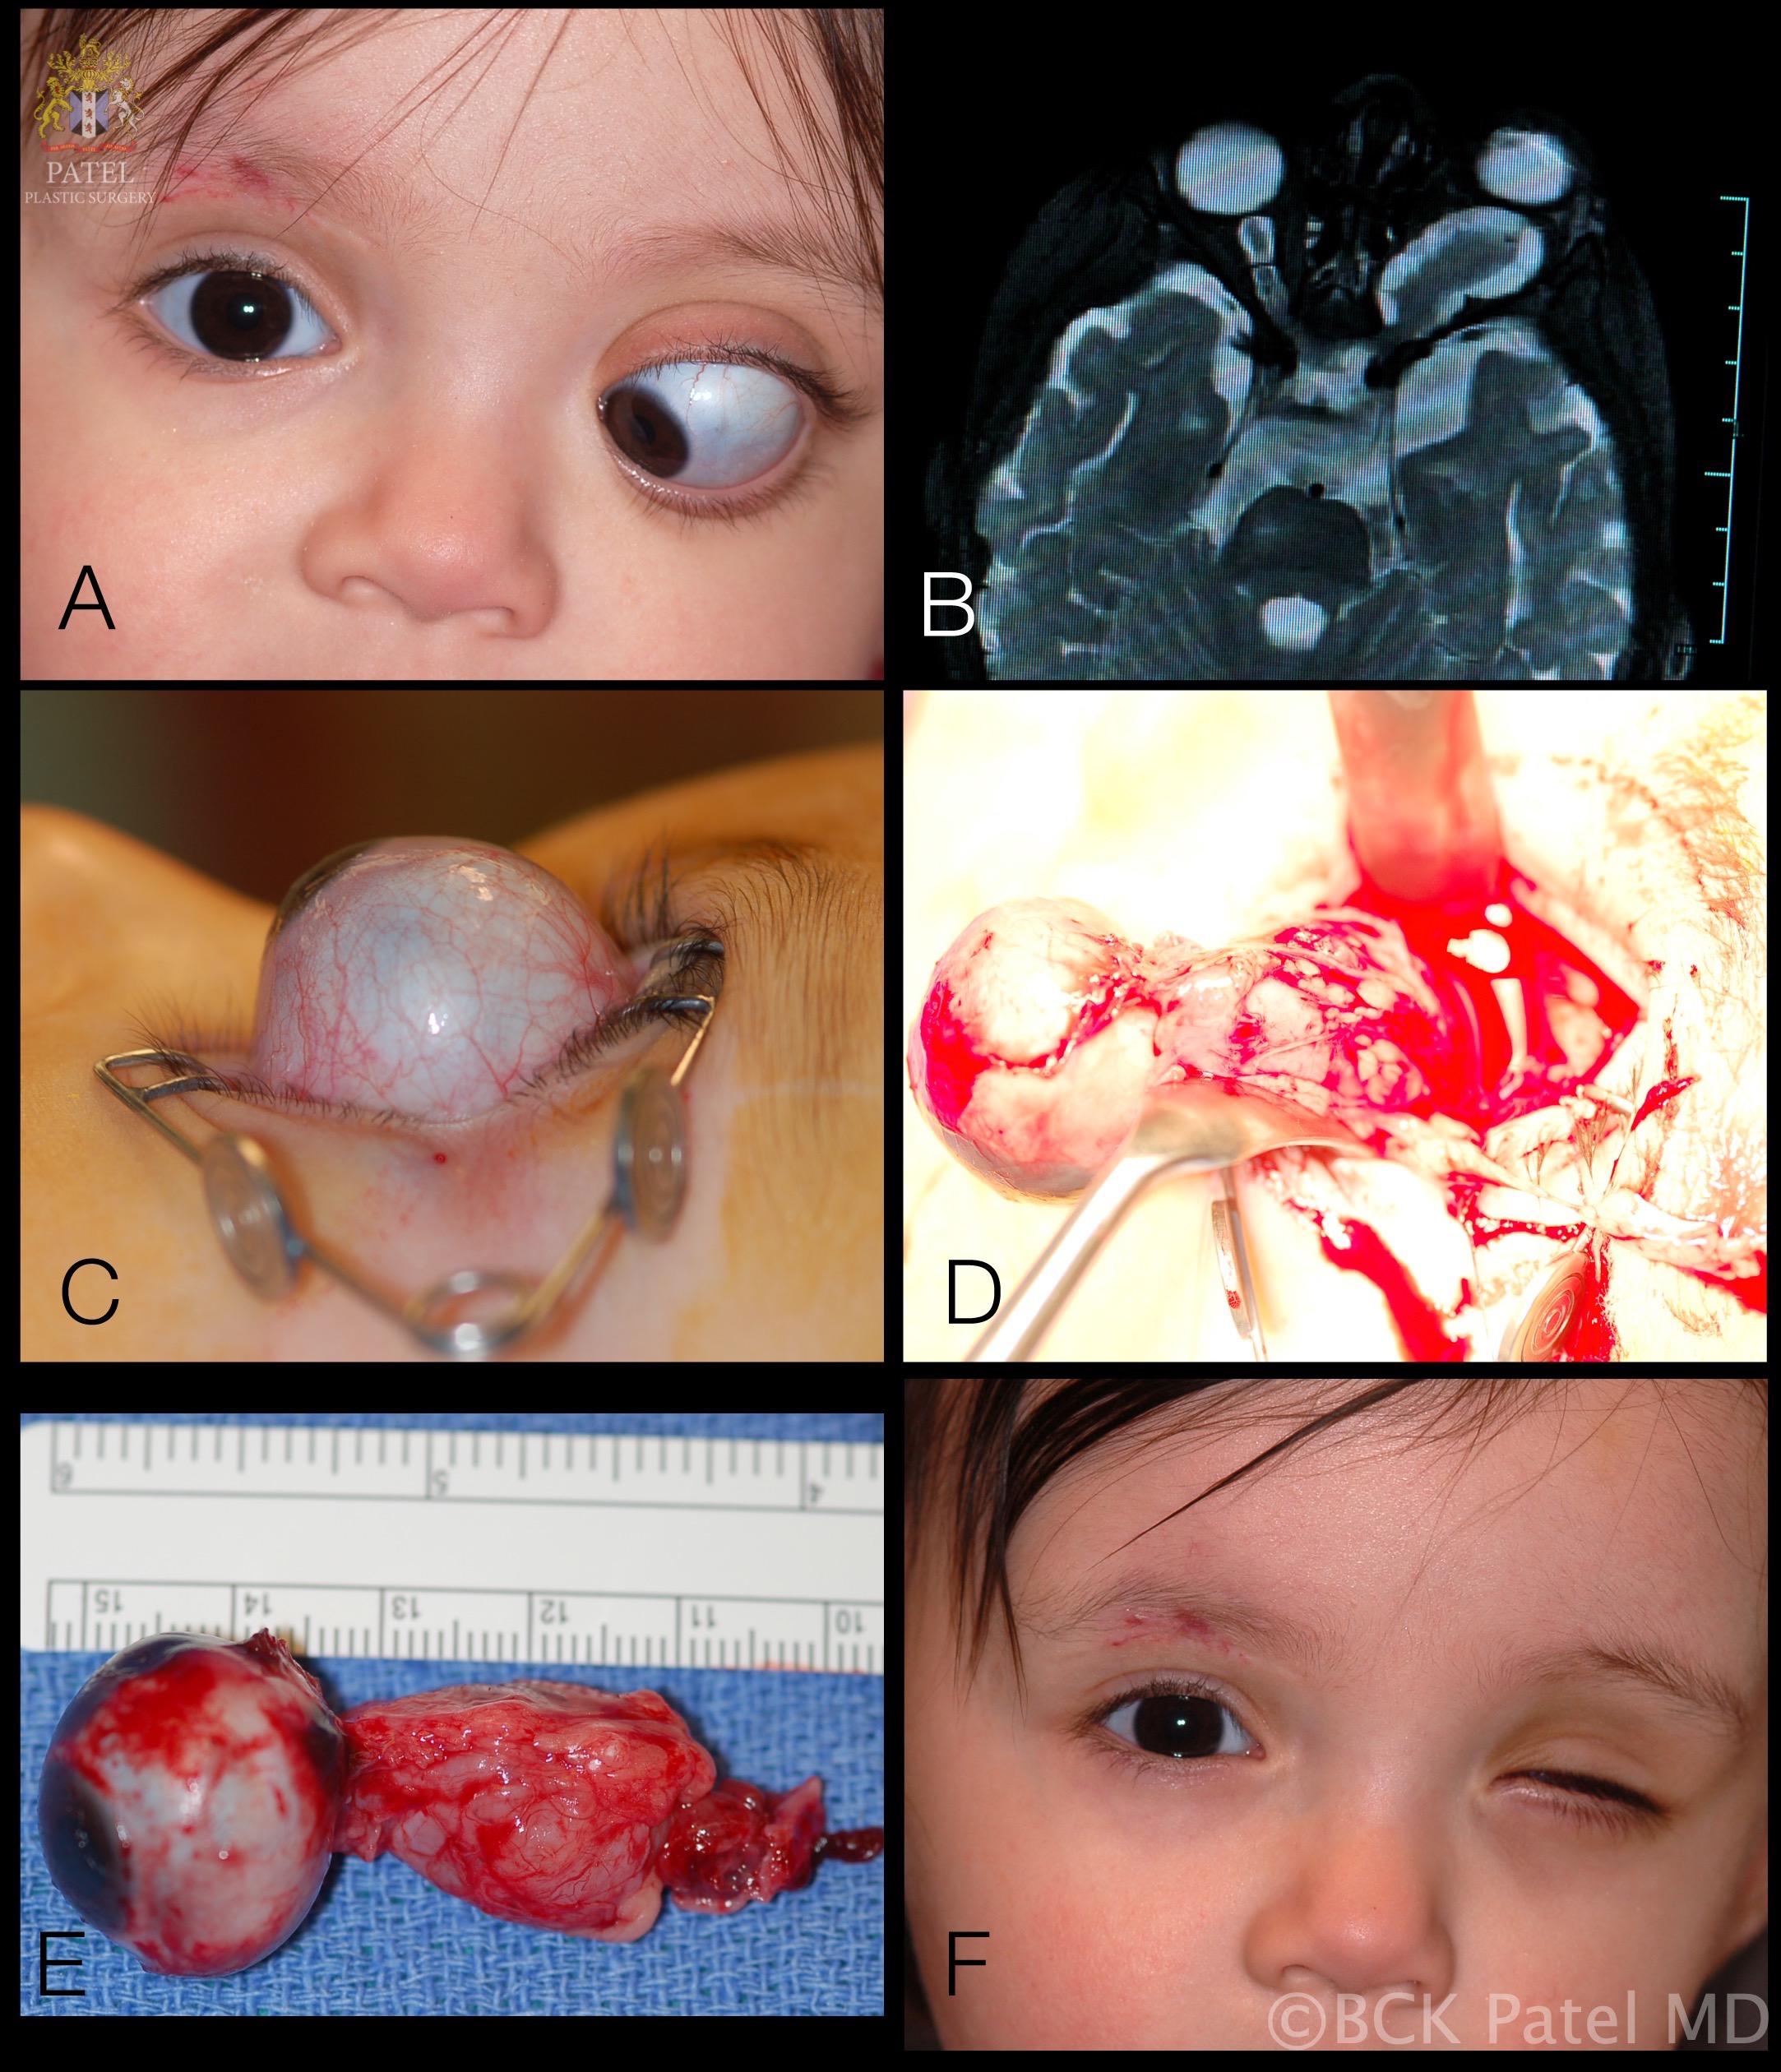 Left optic nerve glioma. A: 12-month-old female presents with marked proptosis, esotropia and lagophthalmos. There was total optic atrophy with a left afferent pupillary defect. B: Axial T2-weighted MRI shows the left optic nerve tumor with the typical kink that is often seen in these large tumors. C: The severity of proptosis is visible on the lateral view where most of the globe is prolapsed out of the orbit. D: Peroperative view of removal of the eye and the tumor. E: Gross specimen. F: Appearance one month after surgery. A prosthetic eye is awaited. 